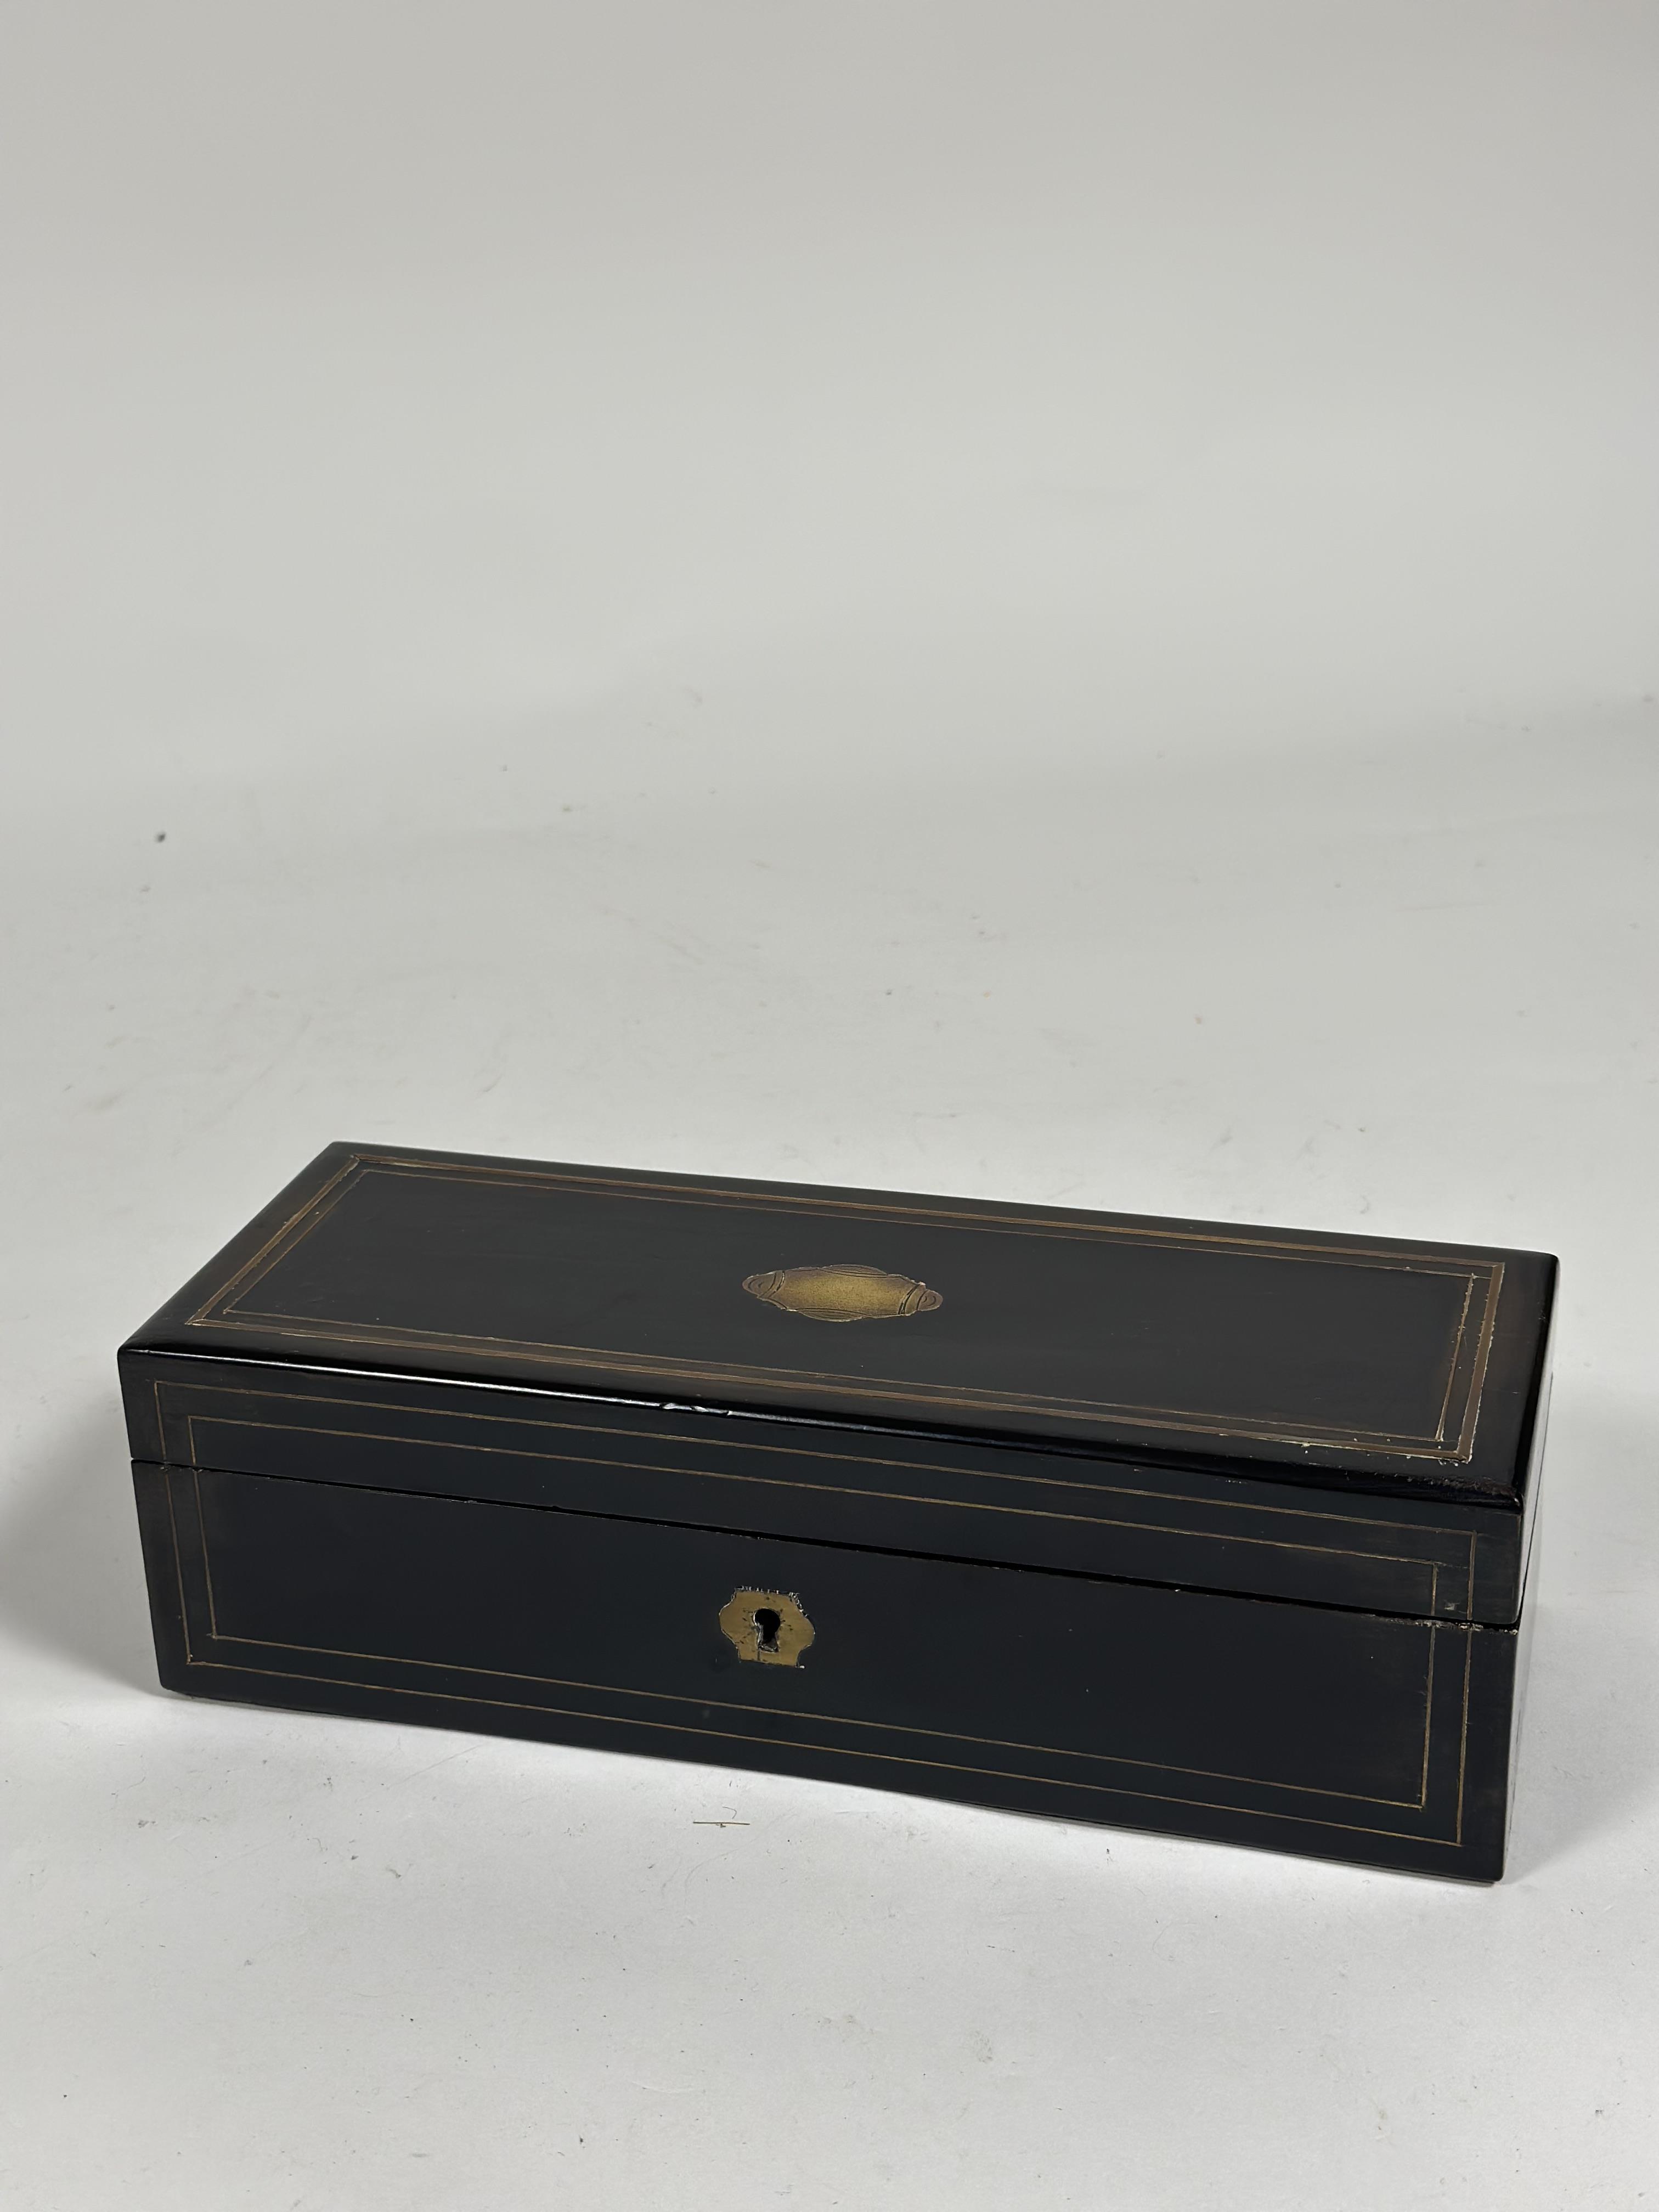 An early 19th century brass-inlaid ebony glove box, of plain oblong form, containing three pairs